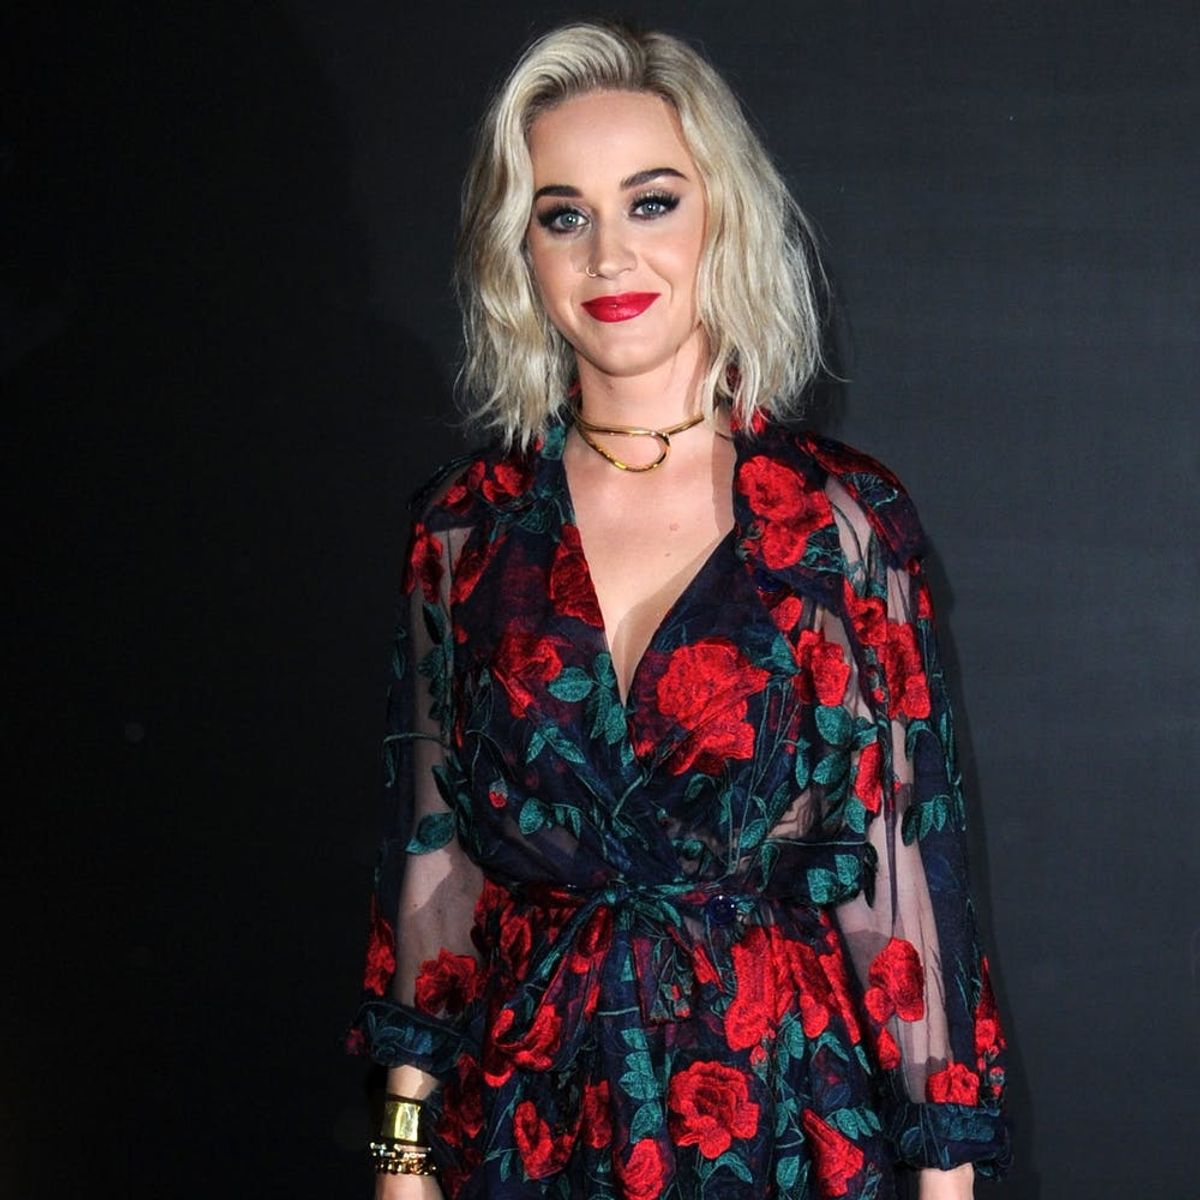 Katy Perry’s Got a Pixie and She’s Twinning With Miley Cyrus